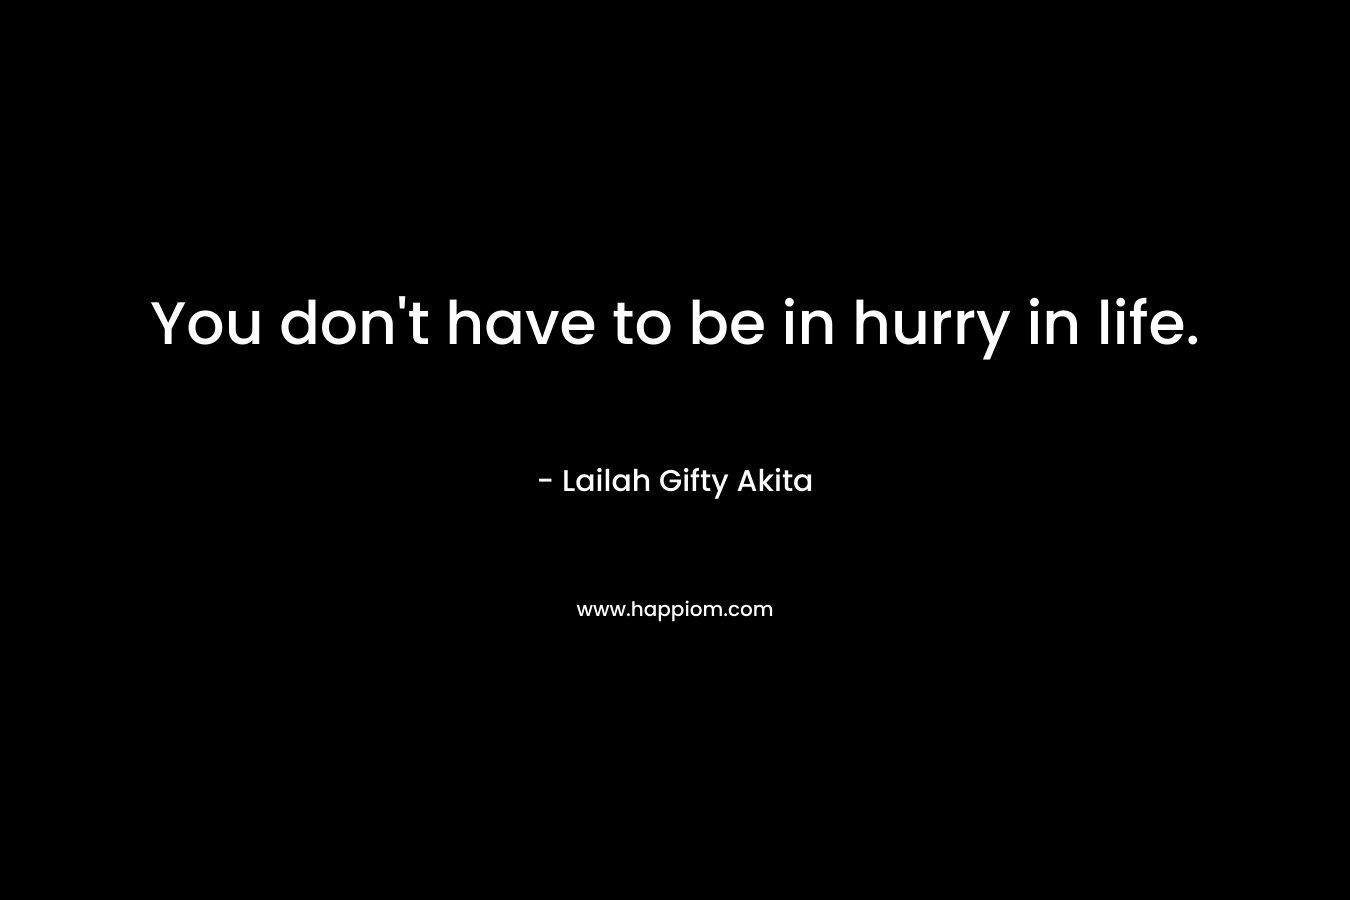 You don't have to be in hurry in life.